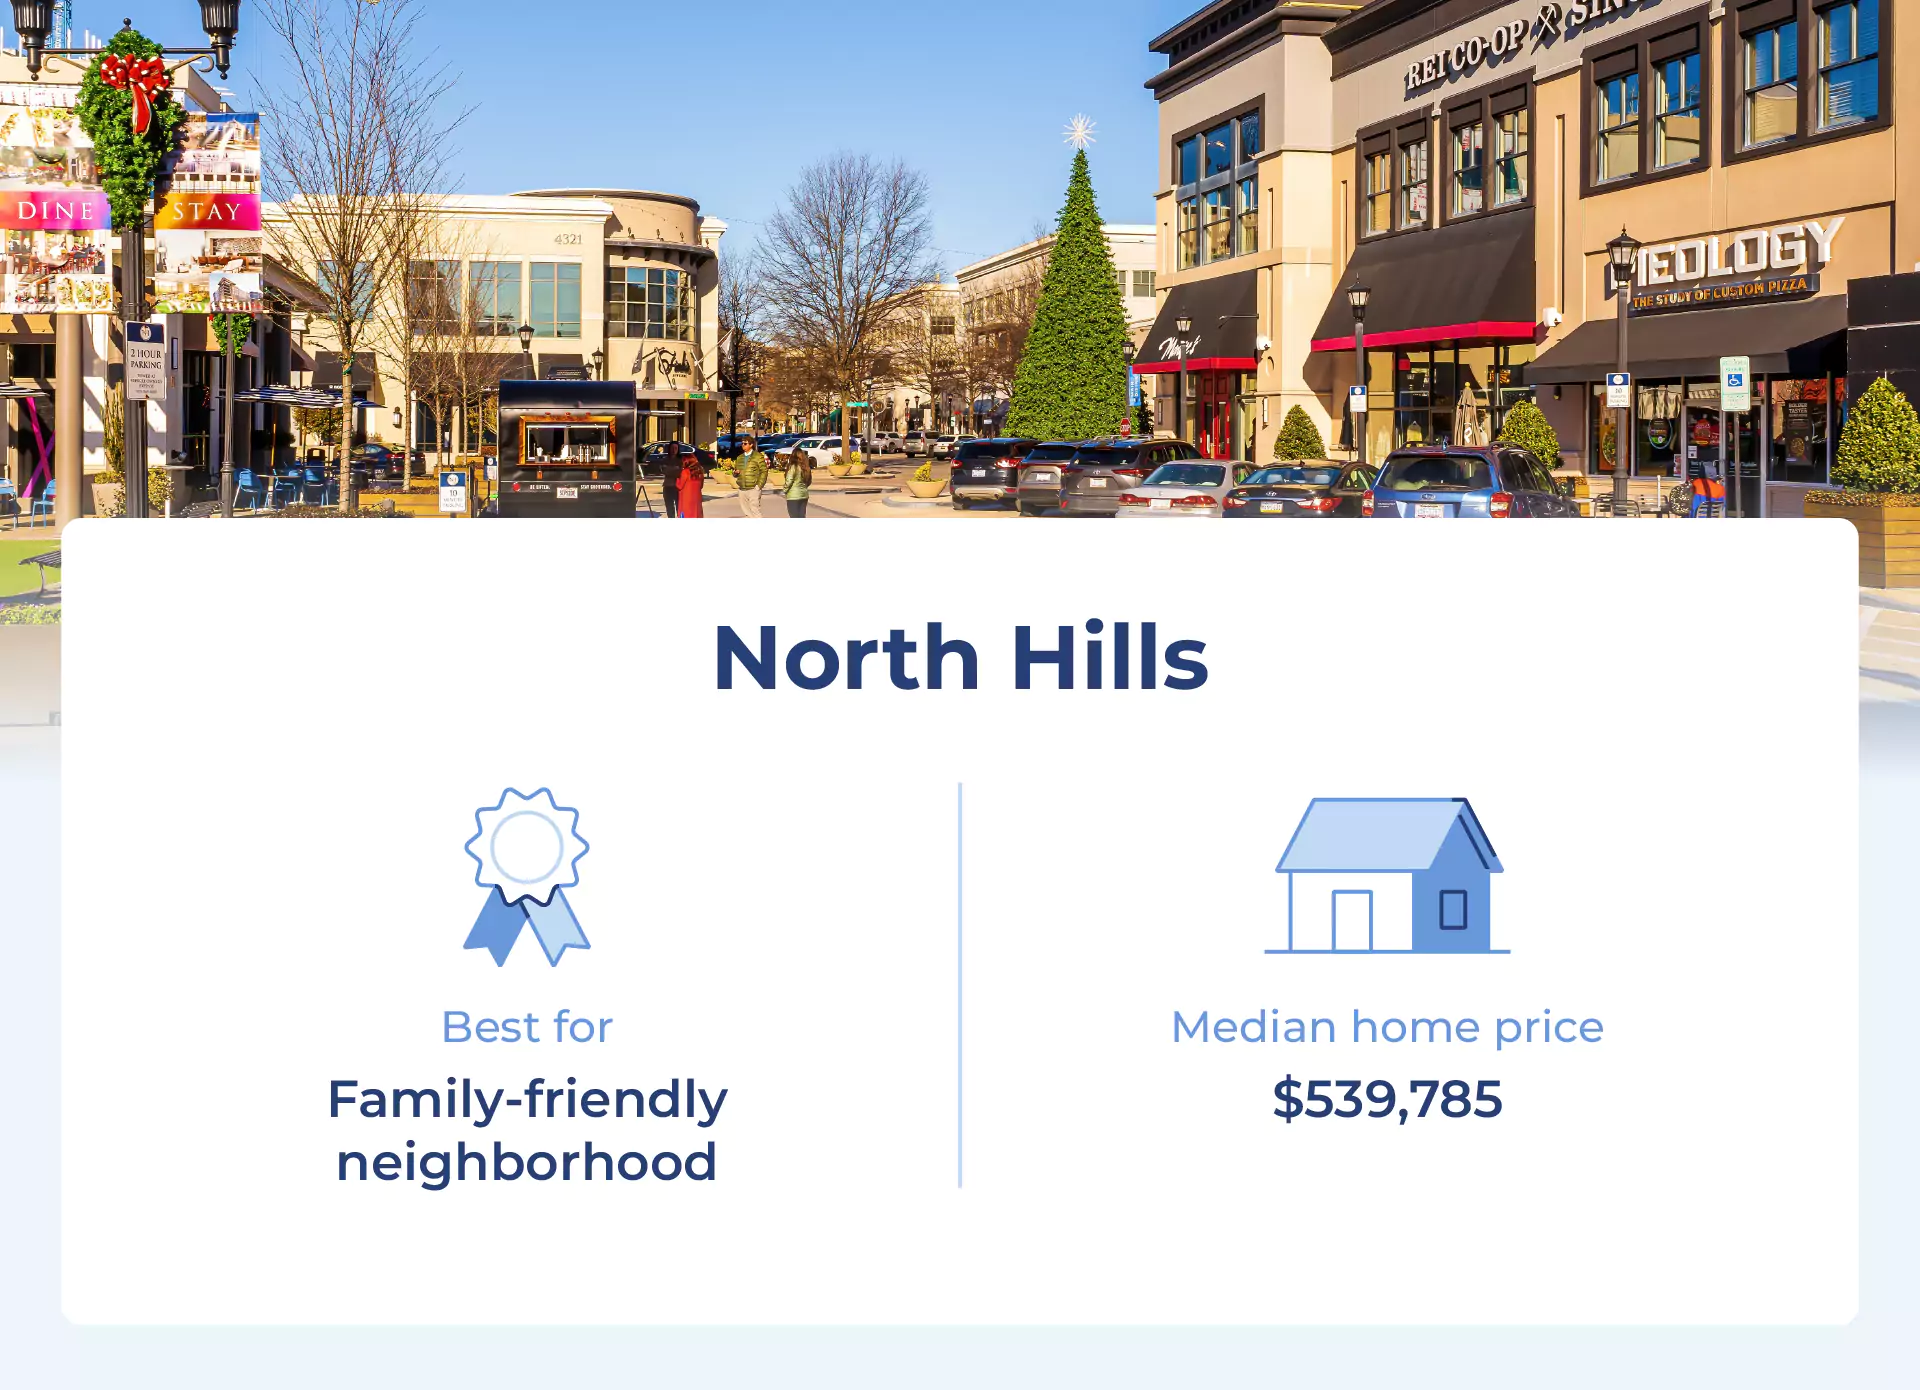 Image shows the median price for one of the best neighborhoods in Raleigh, North Hills.